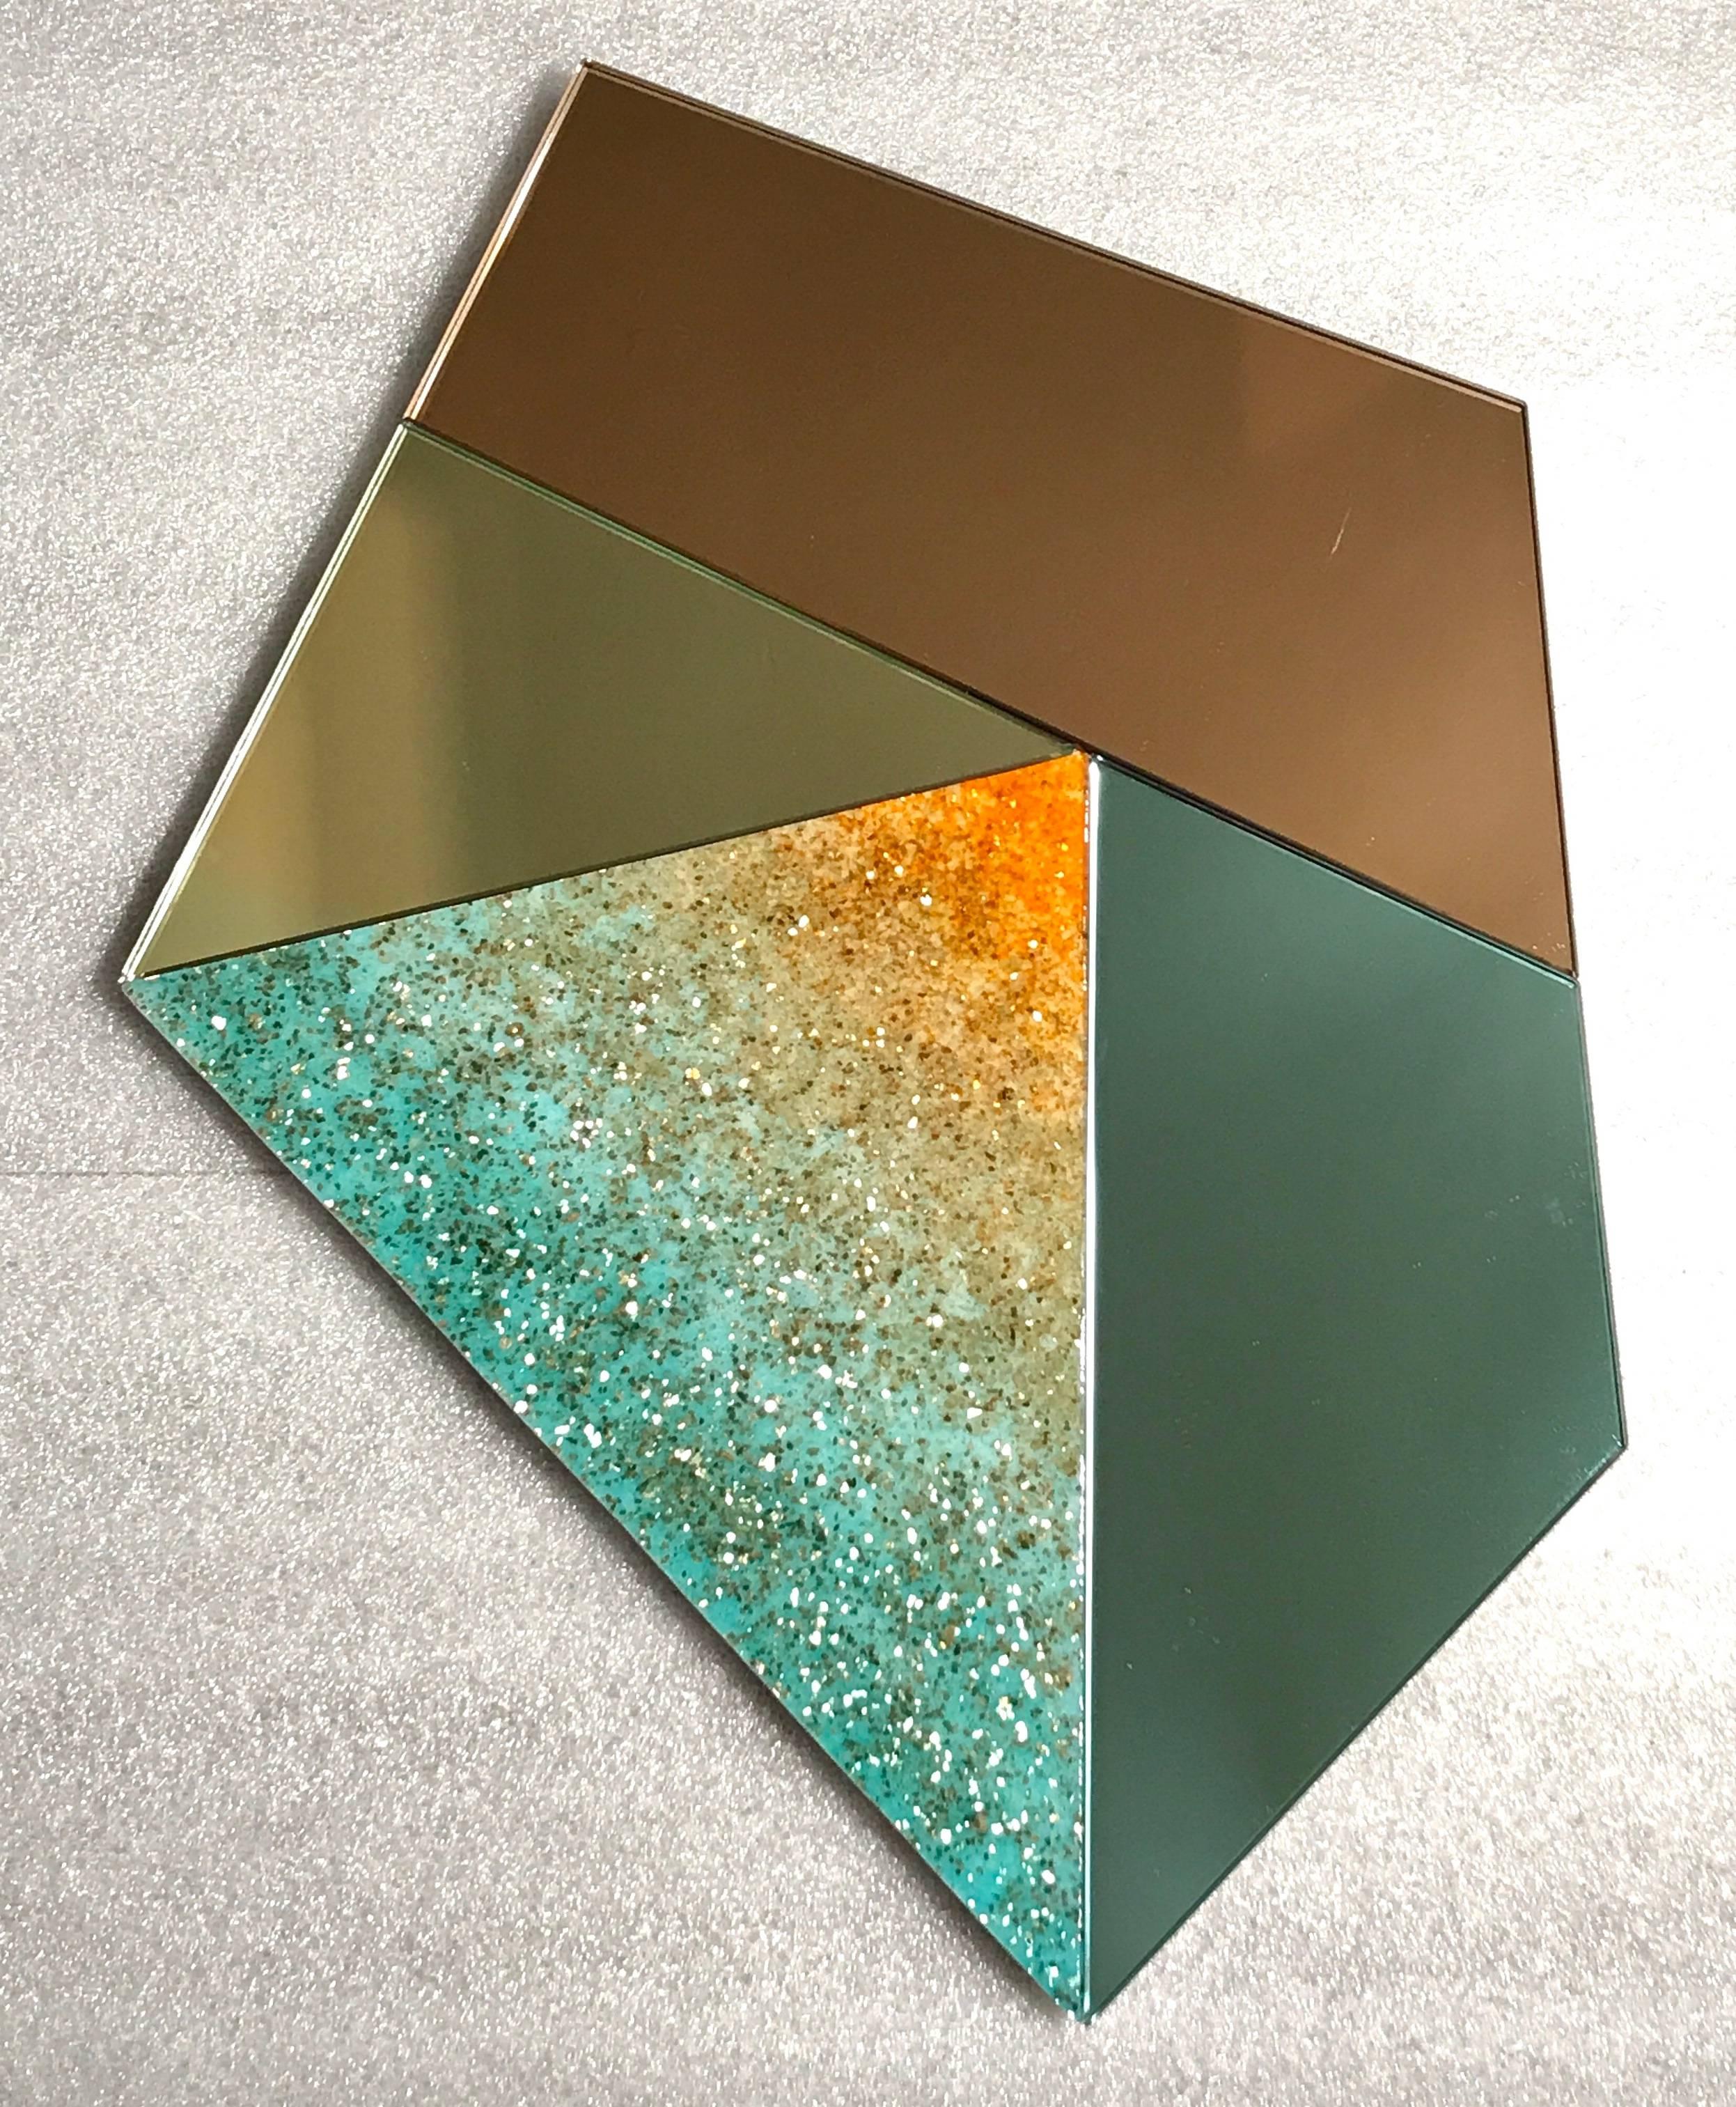 
Mirror wall art, each one unique with handmade kiln-formed glass sections. Each piece is made using ground powdered glass with copper and silver mica built up in fine layers, fired multiple times then laboriously cold worked to a polished finish.